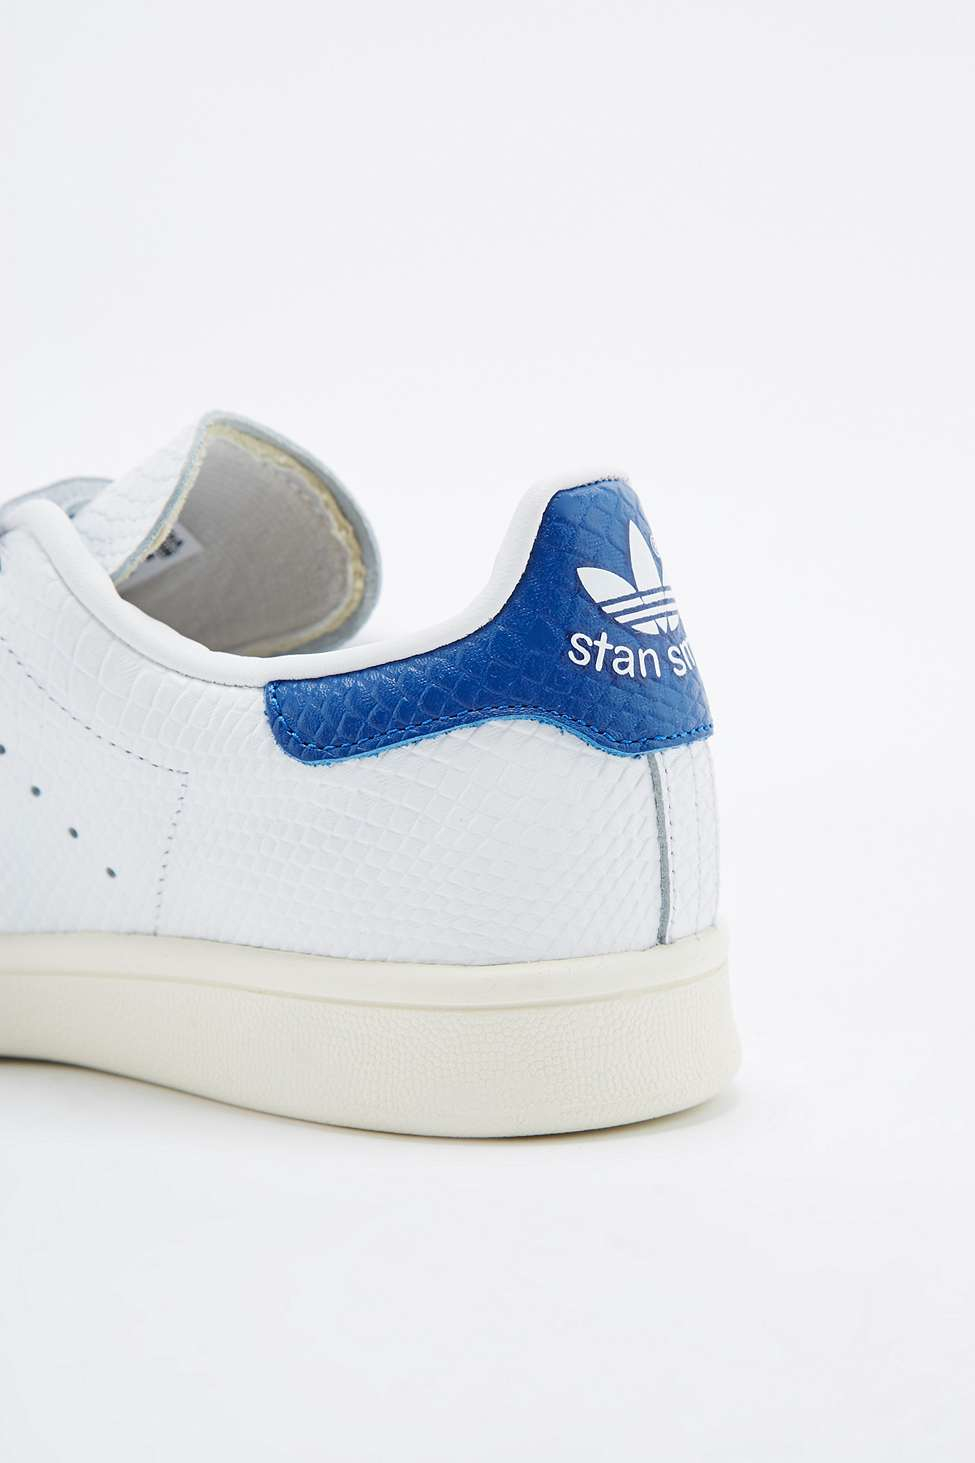 adidas originals stan smith velcro trainers in white and blue